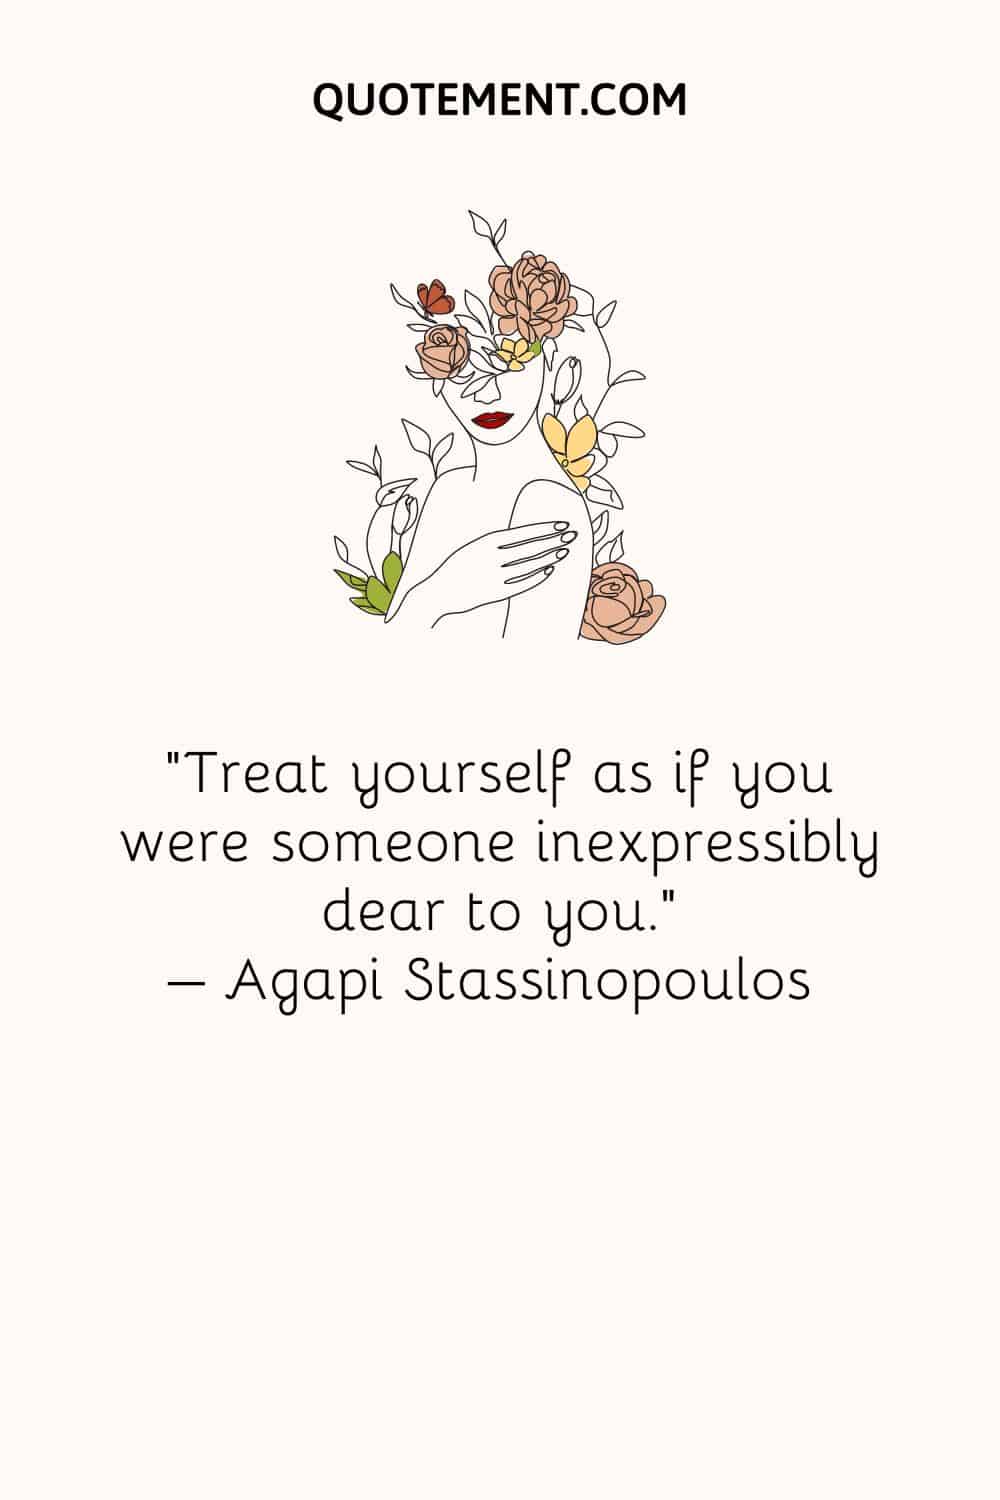 Treat yourself as if you were someone inexpressibly dear to you